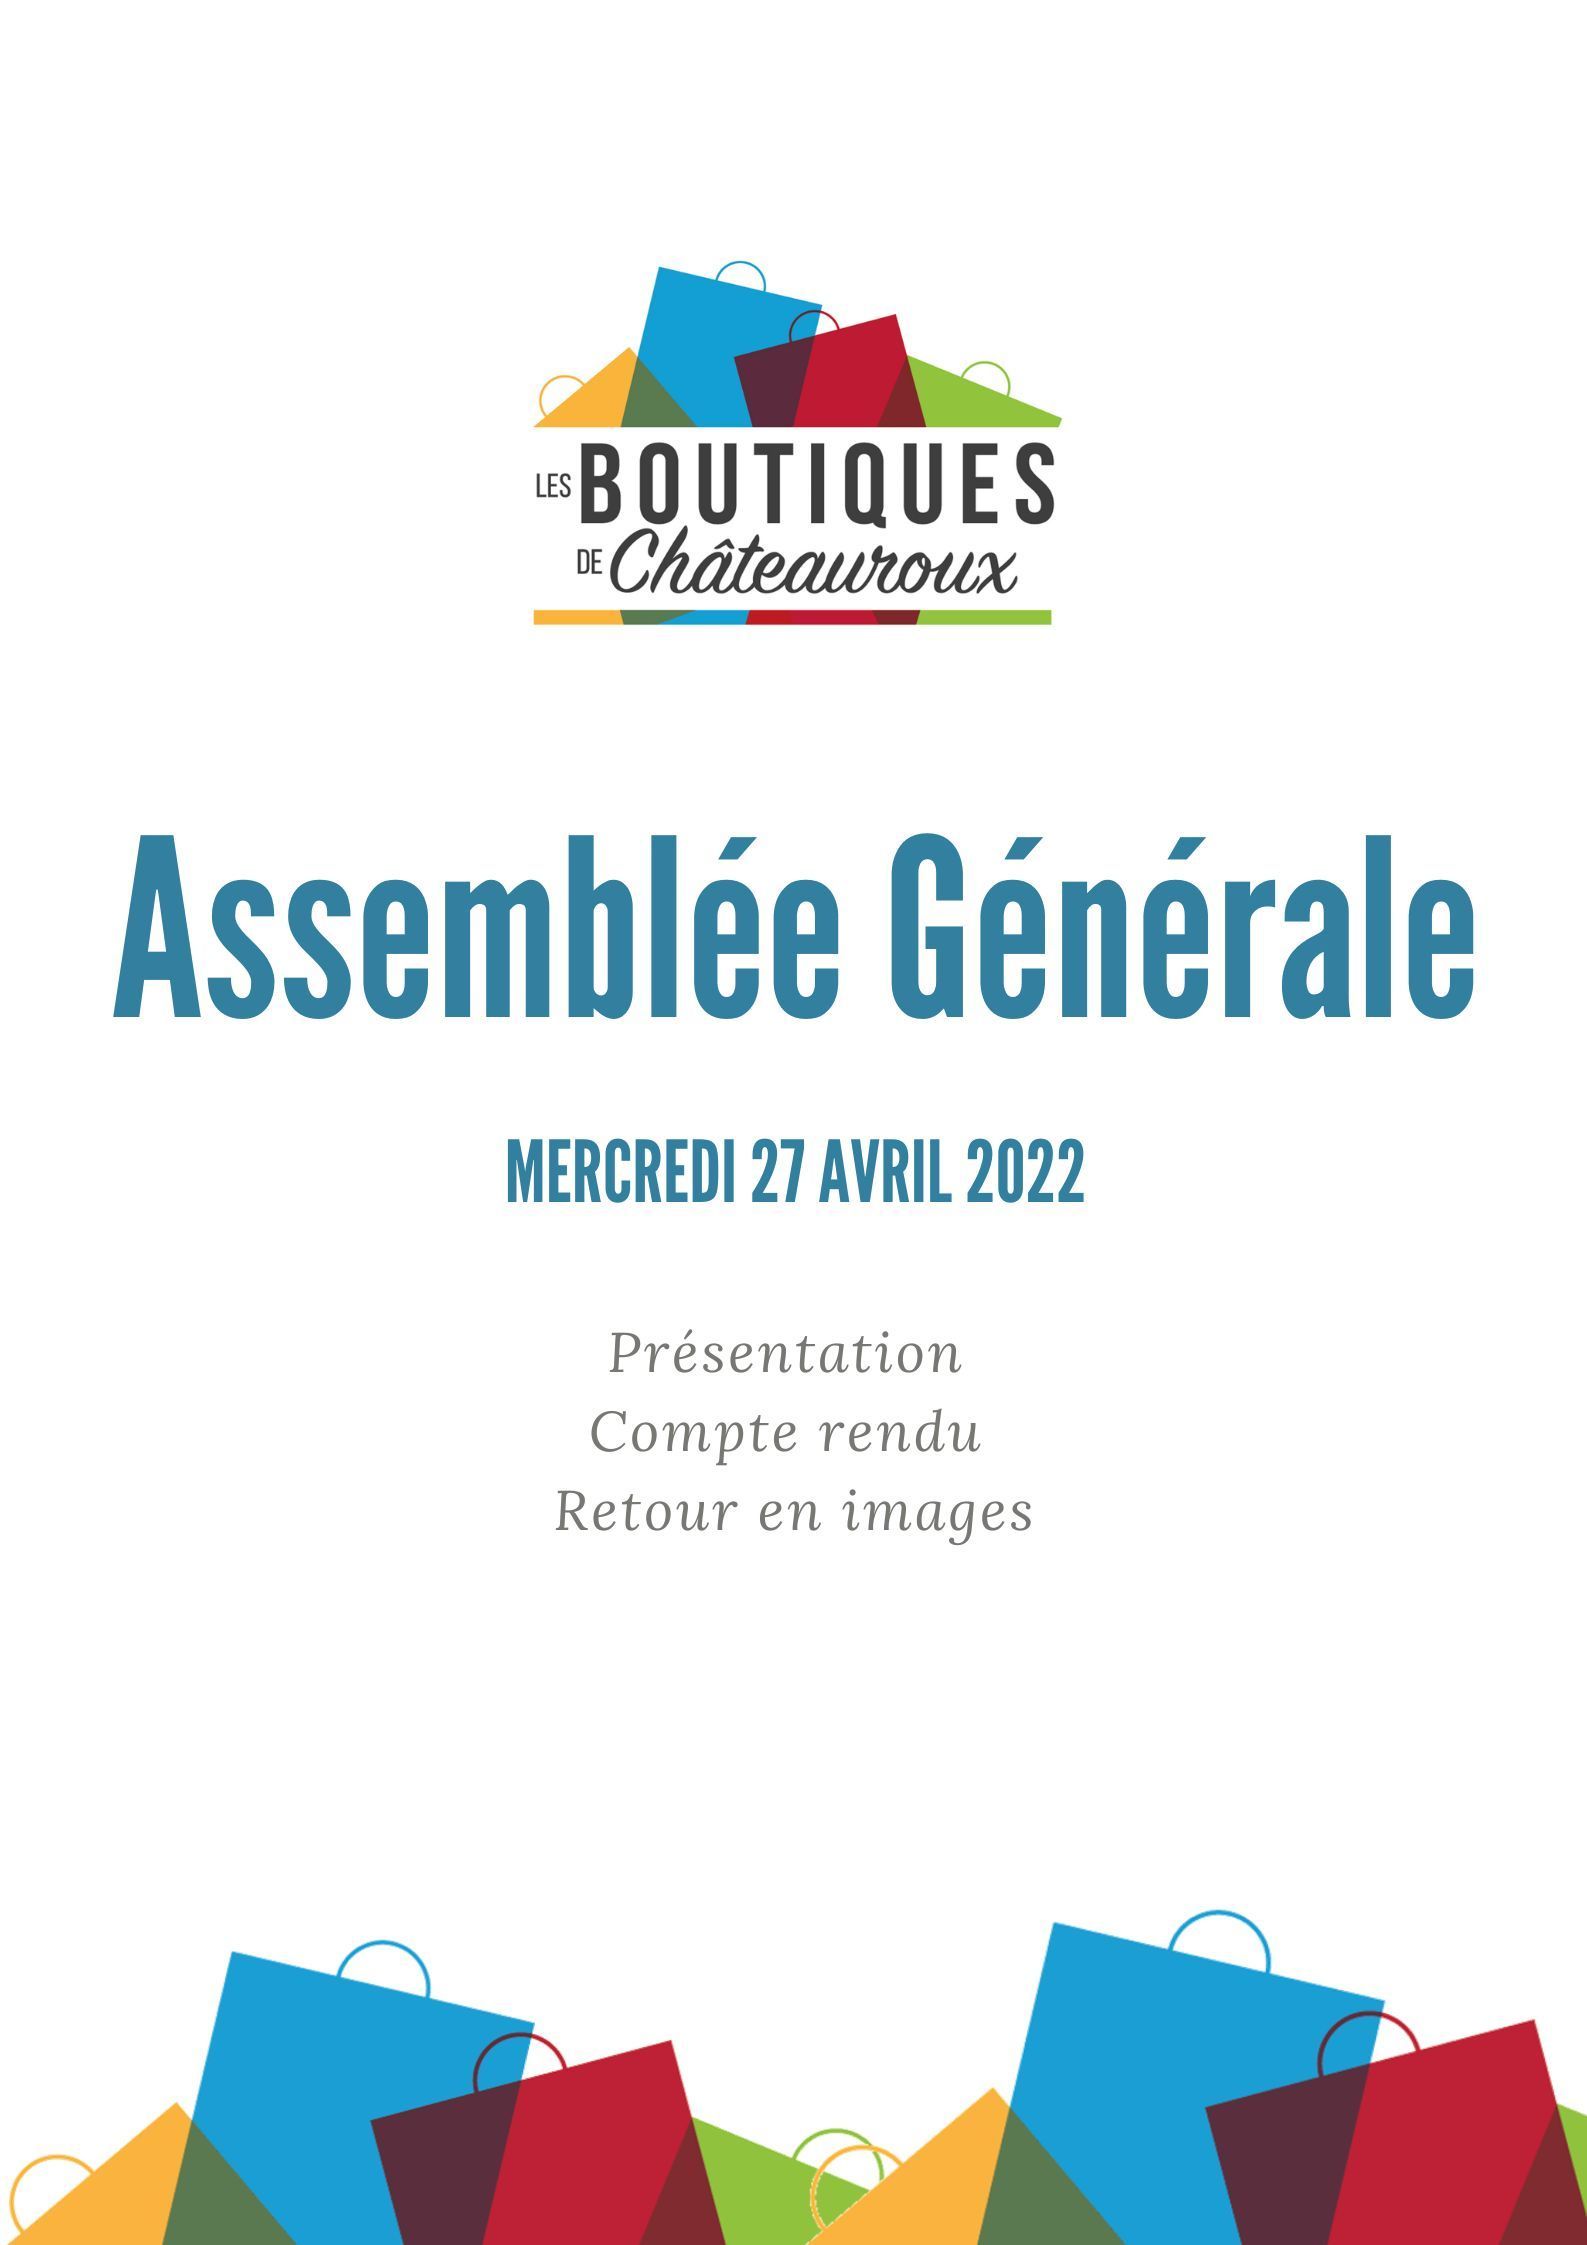 <br />
<b>Notice</b>:  Undefined variable: image in <b>/var/www/sites/site-boutiquesdechateauroux.h-and-co.fr/application/views/evenement/old.php</b> on line <b>44</b><br />
